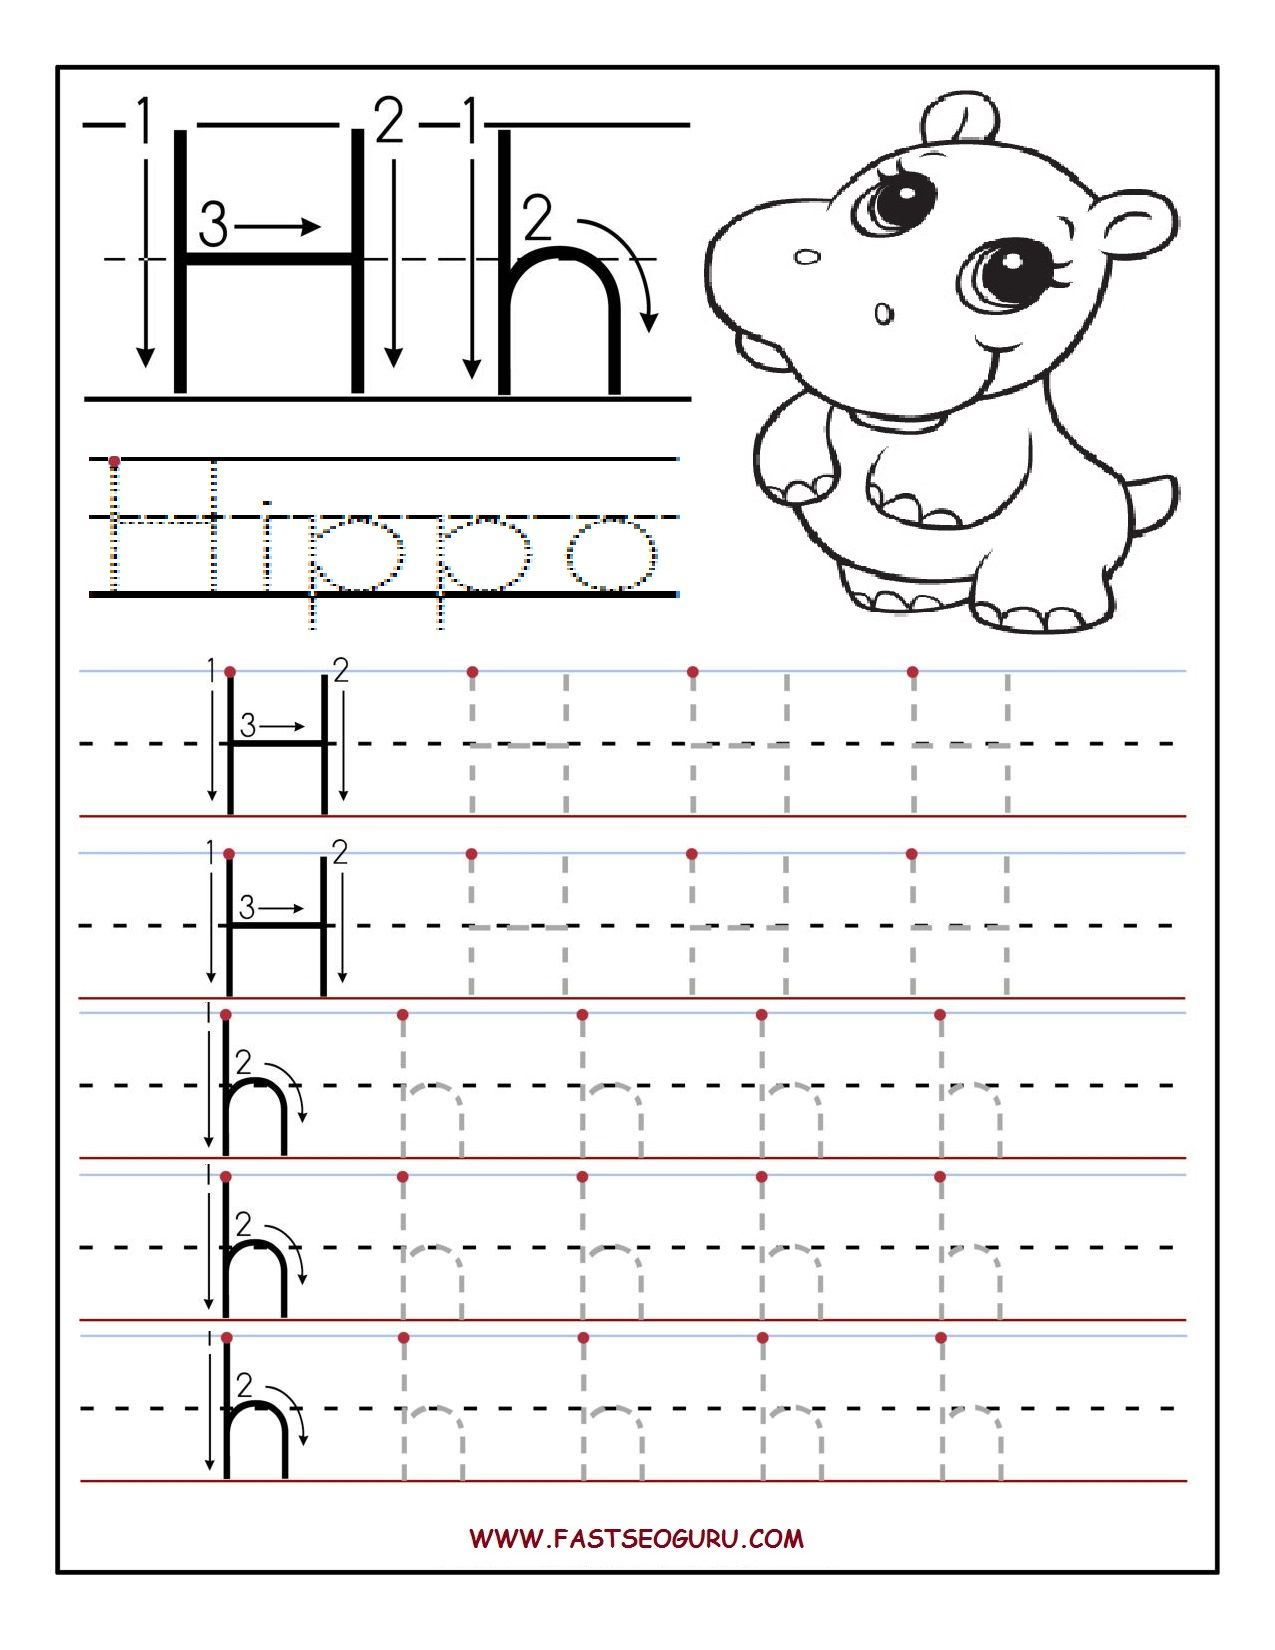 Printable Letter H Tracing Worksheets For Preschool pertaining to H Letter Tracing